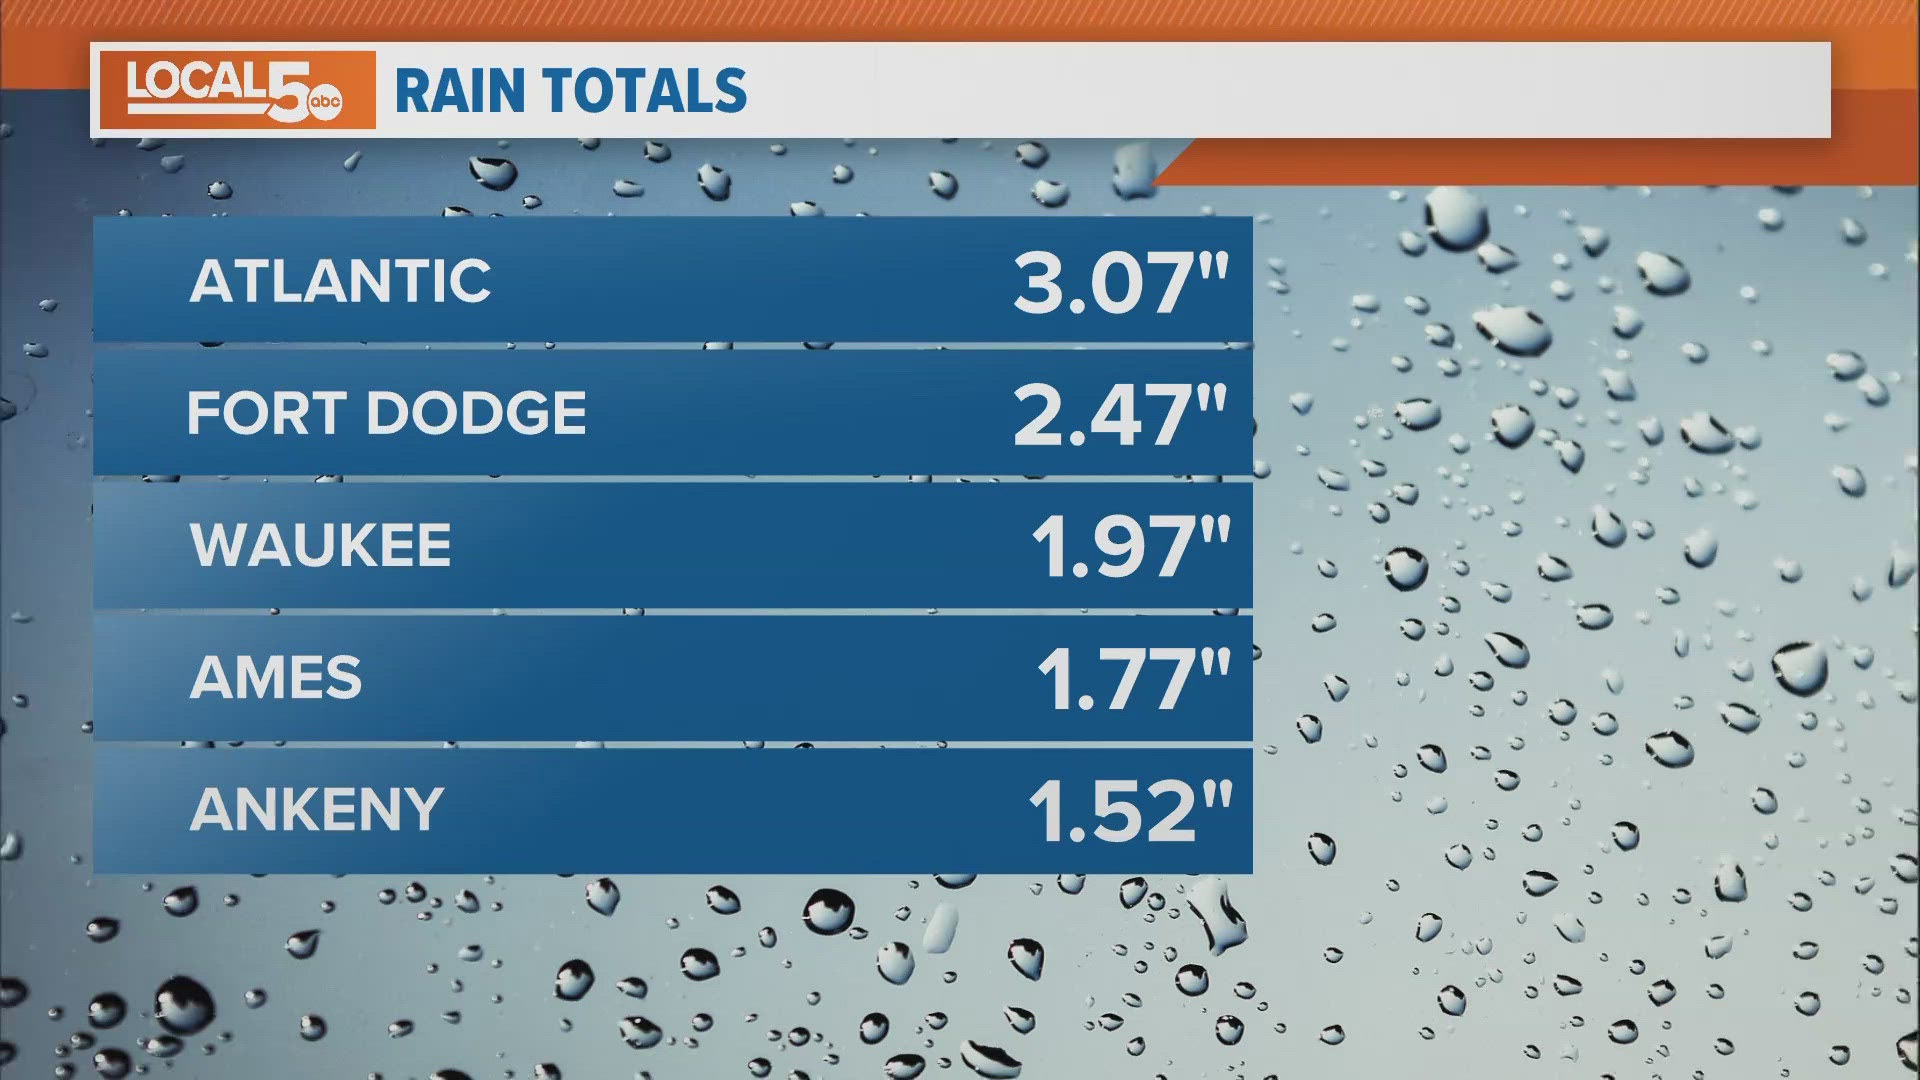 Many cities received over 1" of rain overnight.